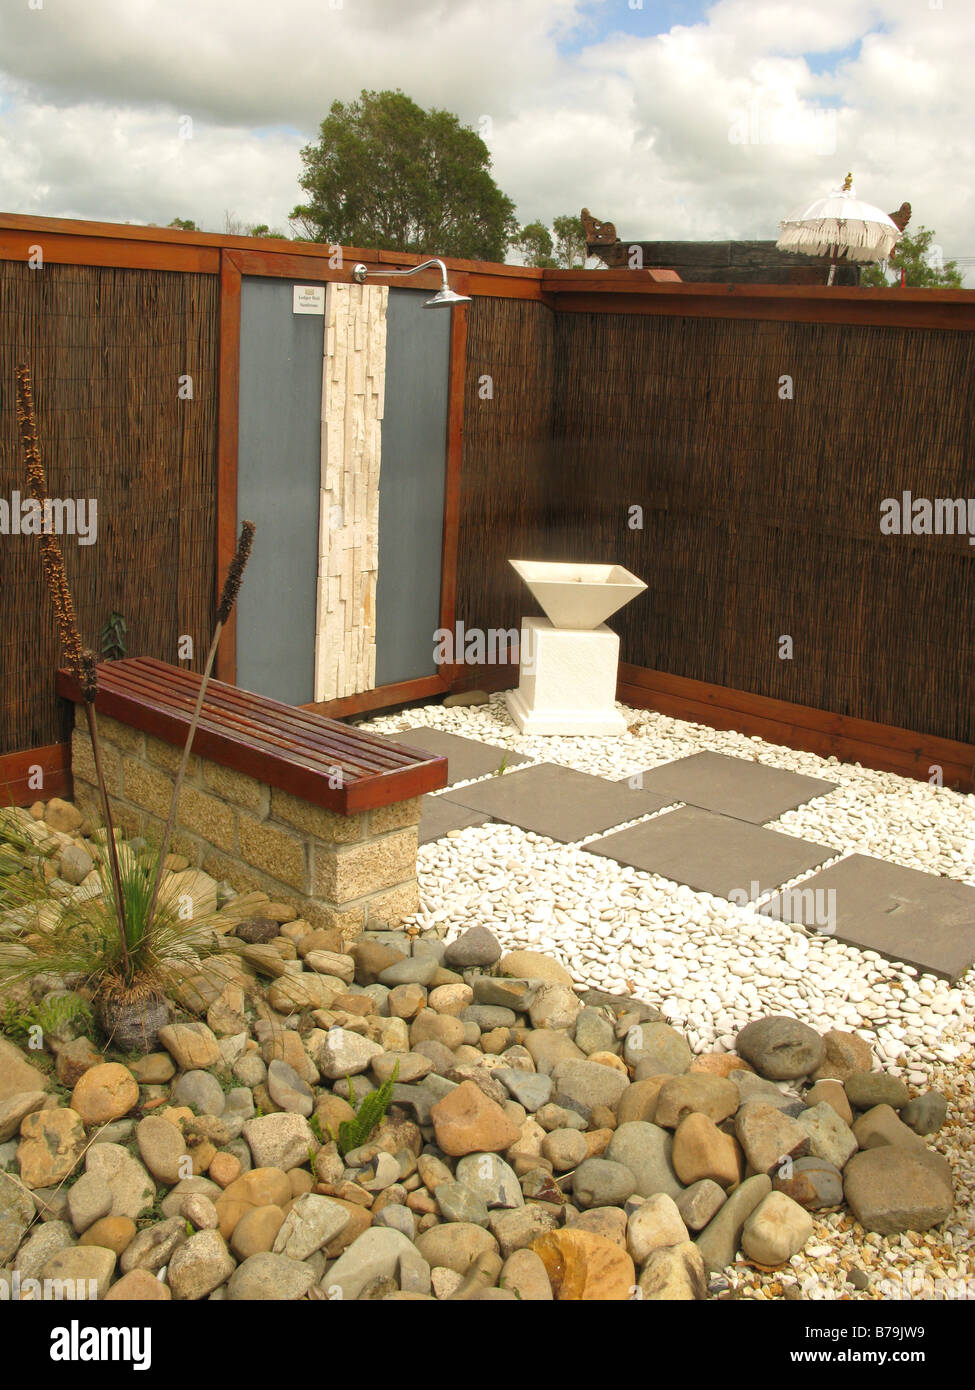 An outdoor shower set in Asian style garden landscape Stock Photo